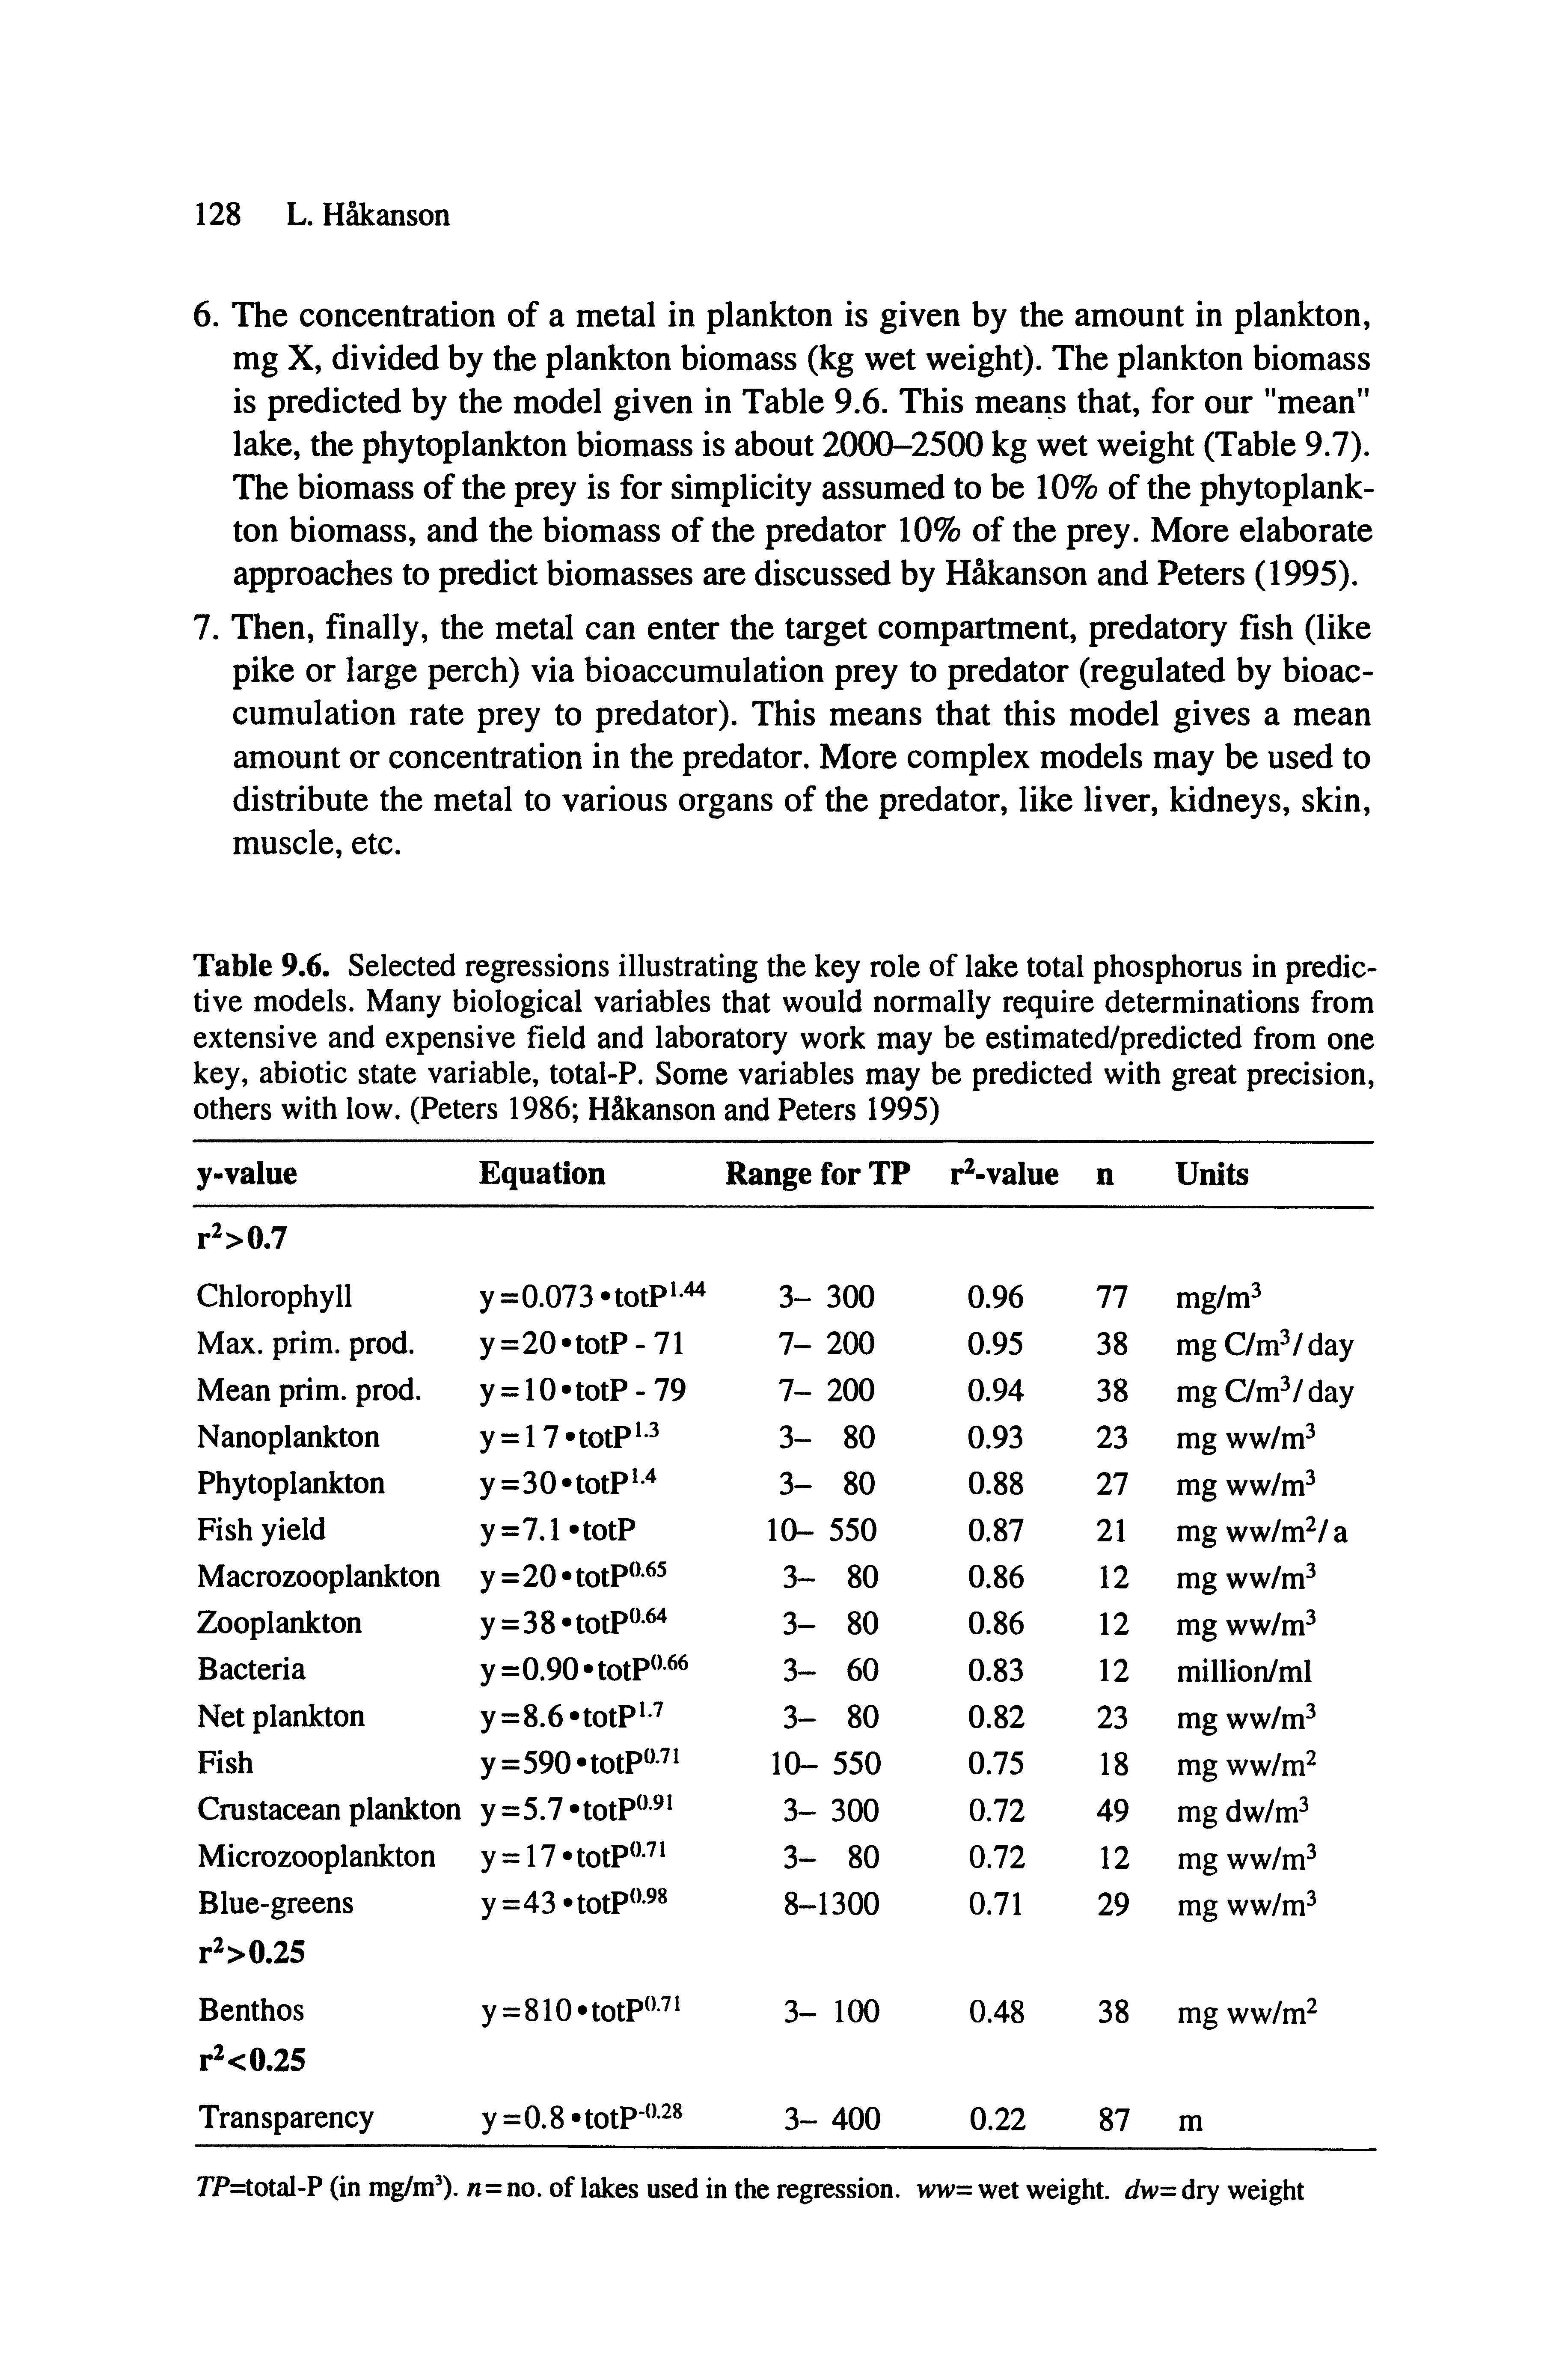 Table 9.6. Selected regressions illustrating the key role of lake total phosphorus in predictive models. Many biological variables that would normally require determinations from extensive and expensive field and laboratory work may be estimated/predicted from one key, abiotic state variable, total-P. Some variables may be predicted with great precision, others with low. (Peters 1986 H kanson and Peters 1995)...